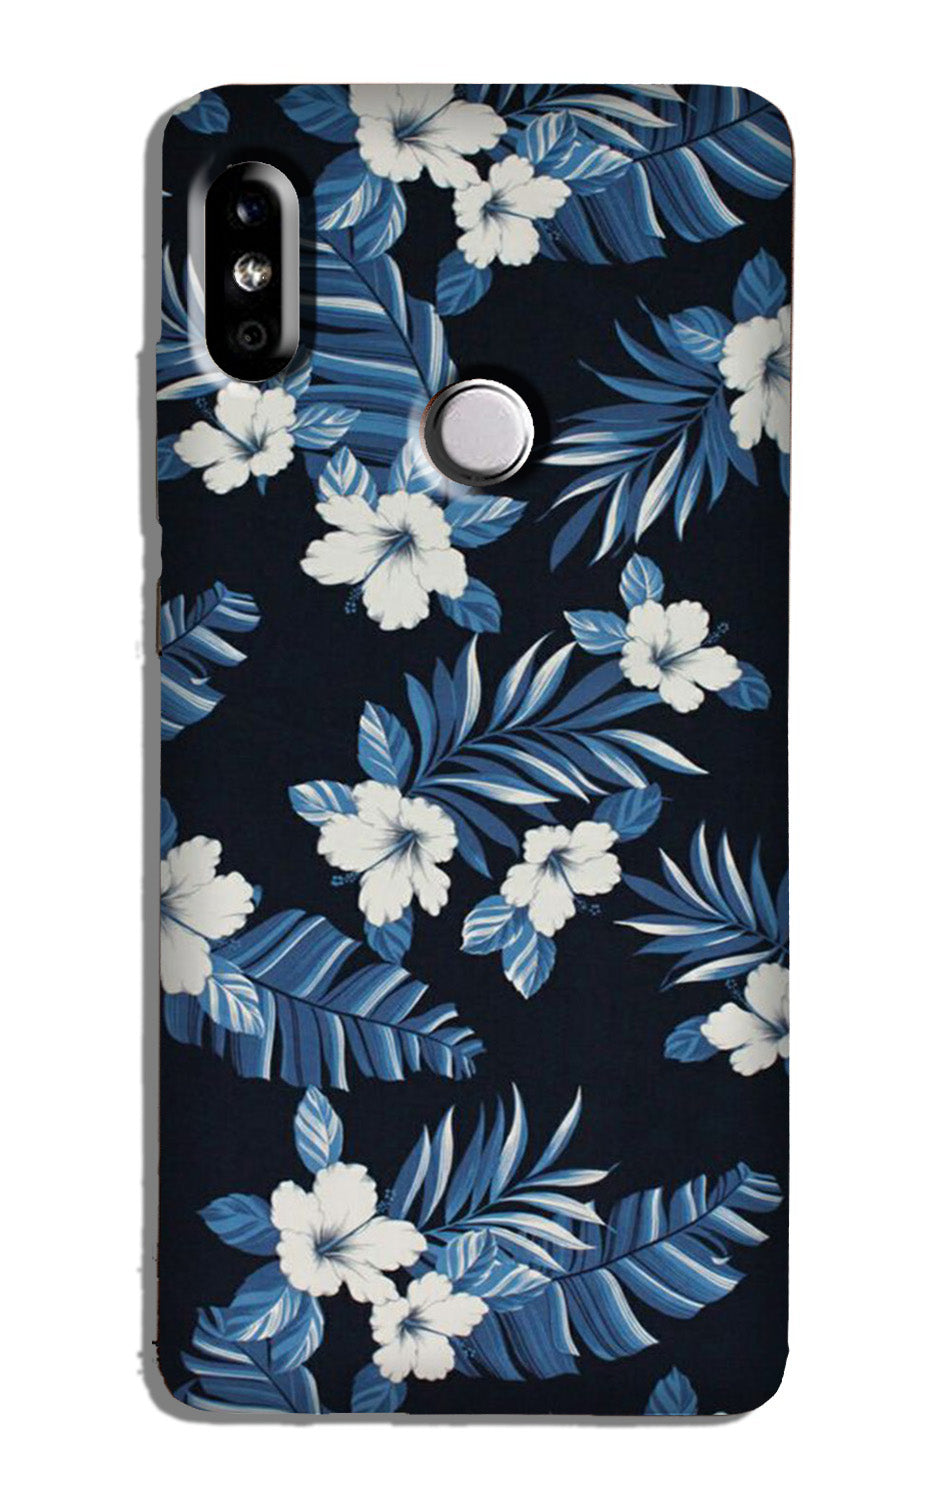 White flowers Blue Background2 Case for Redmi Note 6 Pro